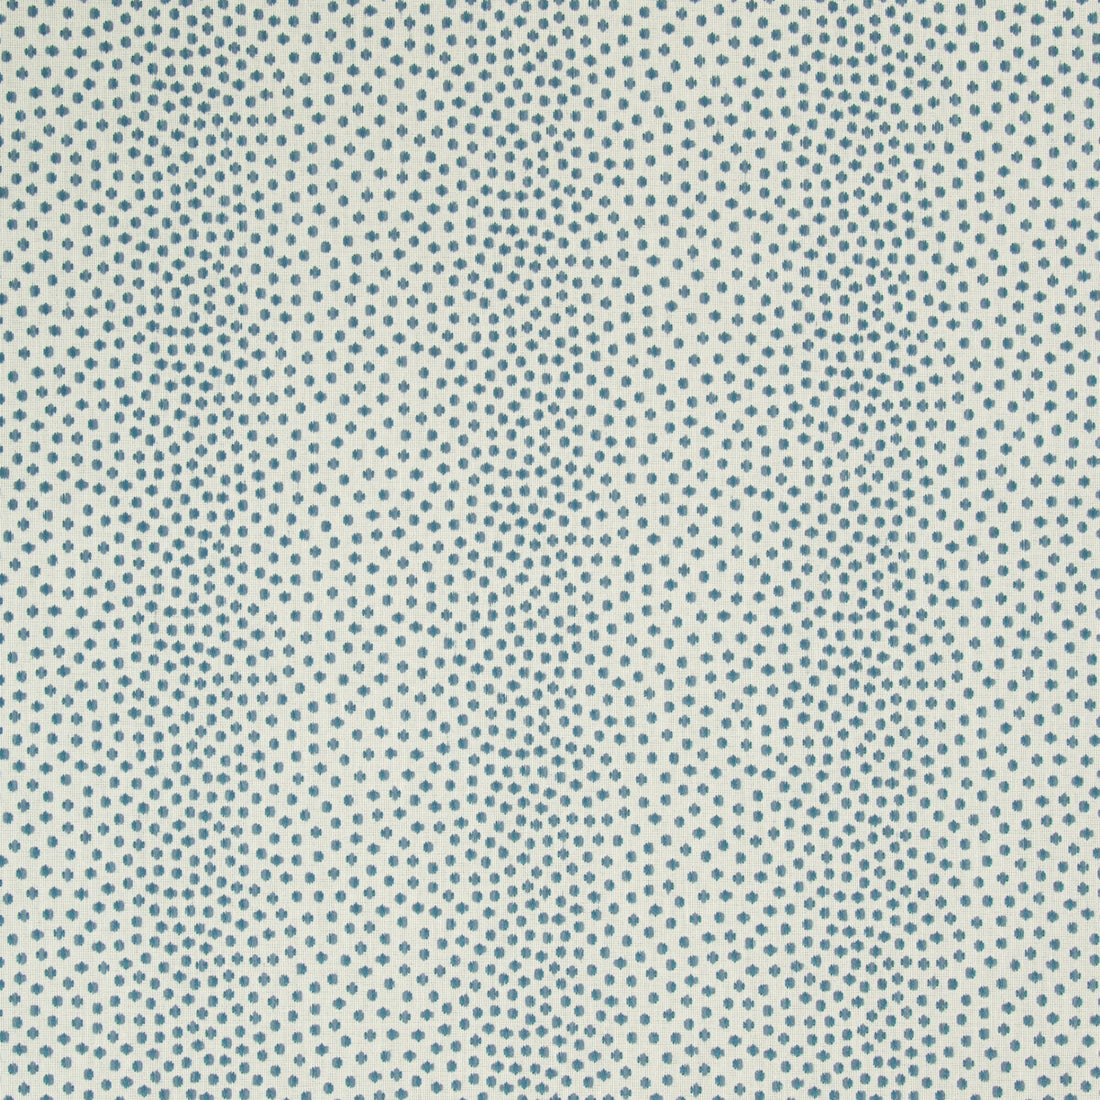 Kravet Design fabric in 34710-5 color - pattern 34710.5.0 - by Kravet Design in the Crypton Home collection